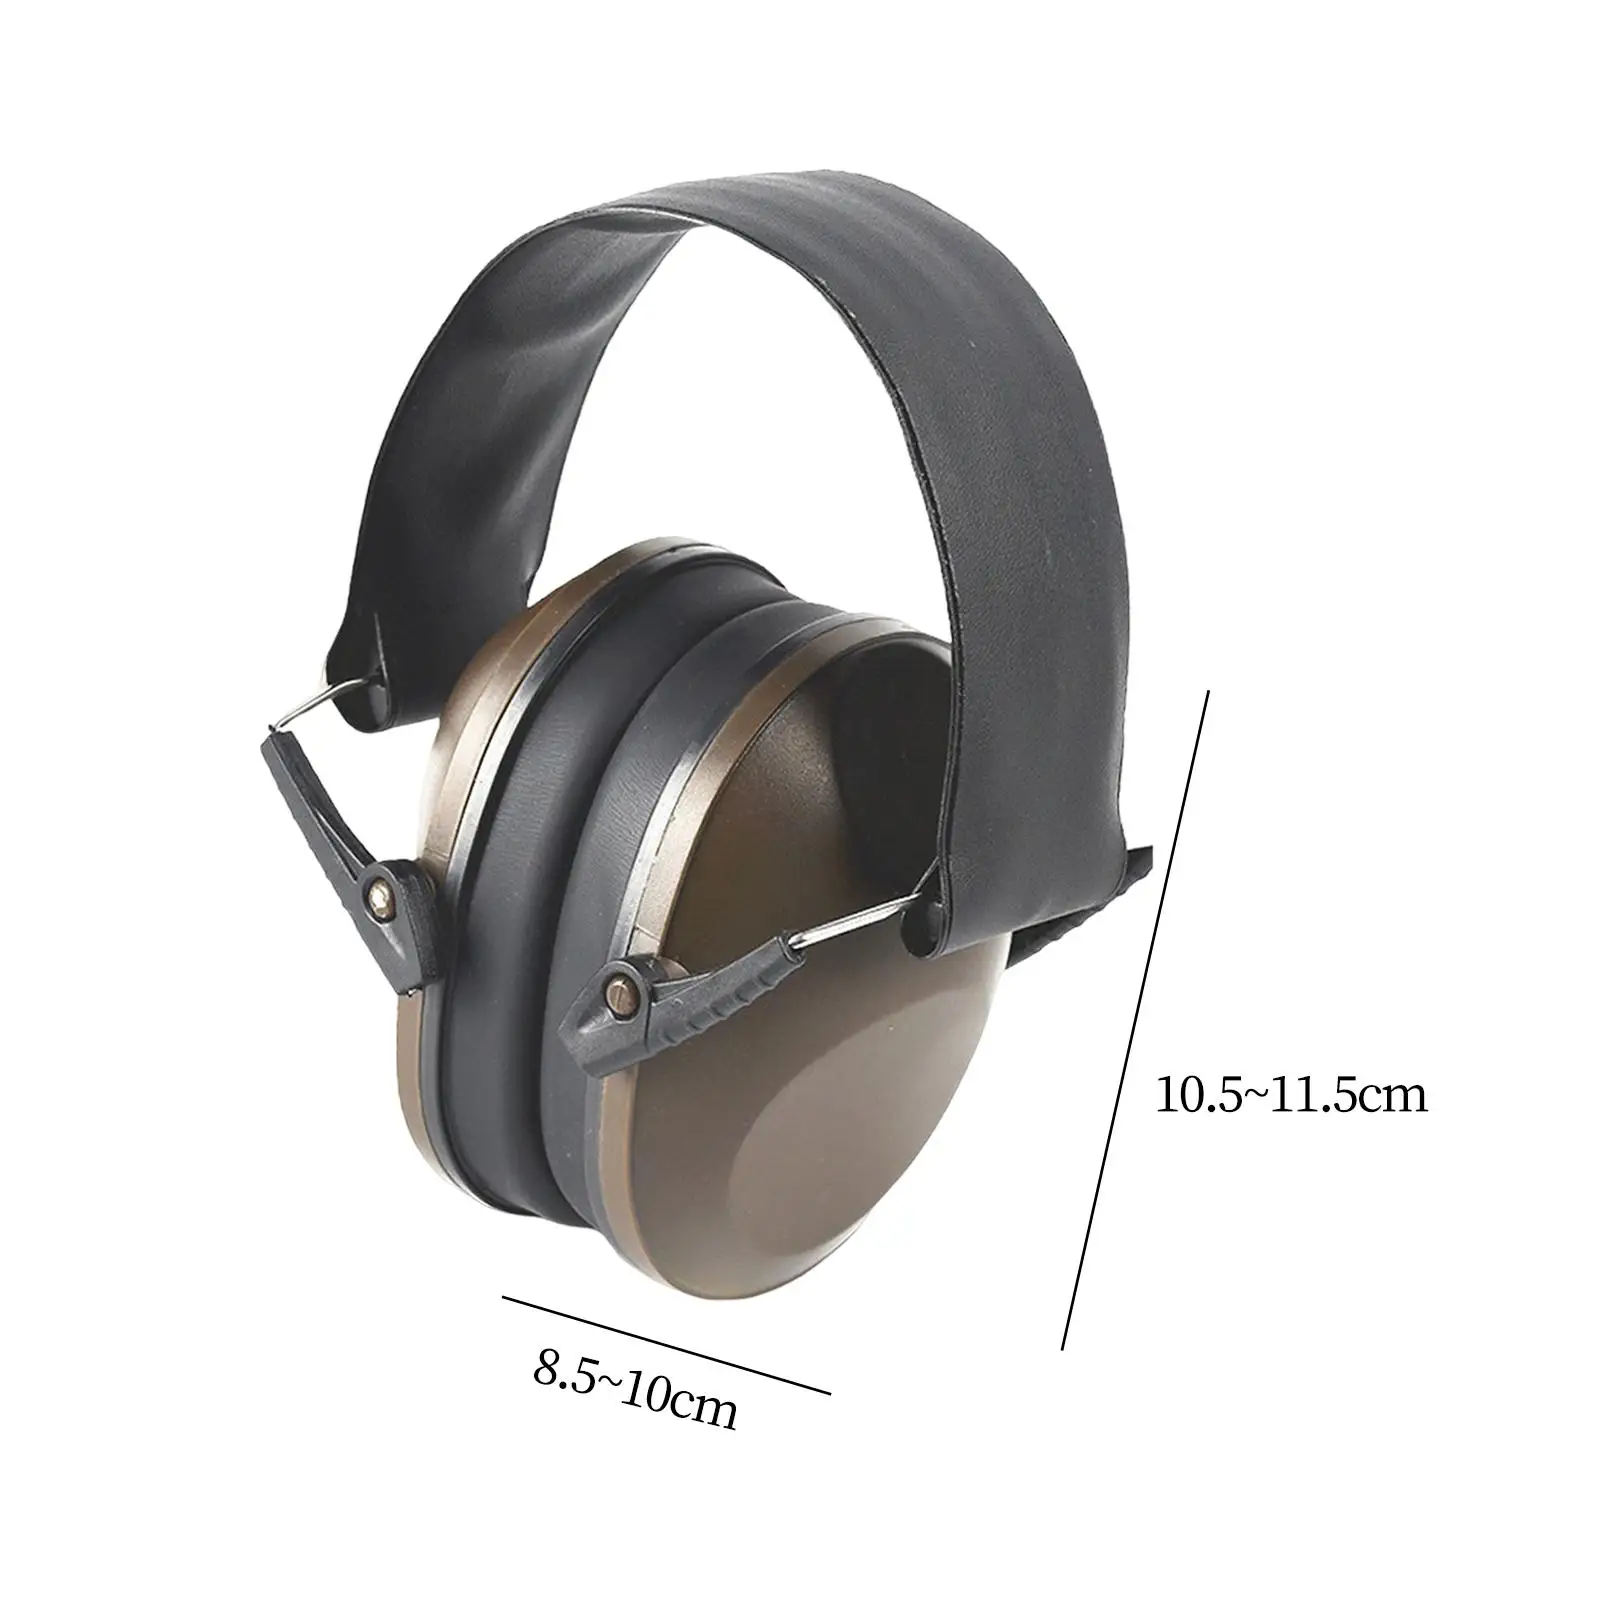 Hearing Ear Protection Ear Muffs Adjustable Head Band Noise Cancelling Ear Defenders for Wood Work Business Travel Teens